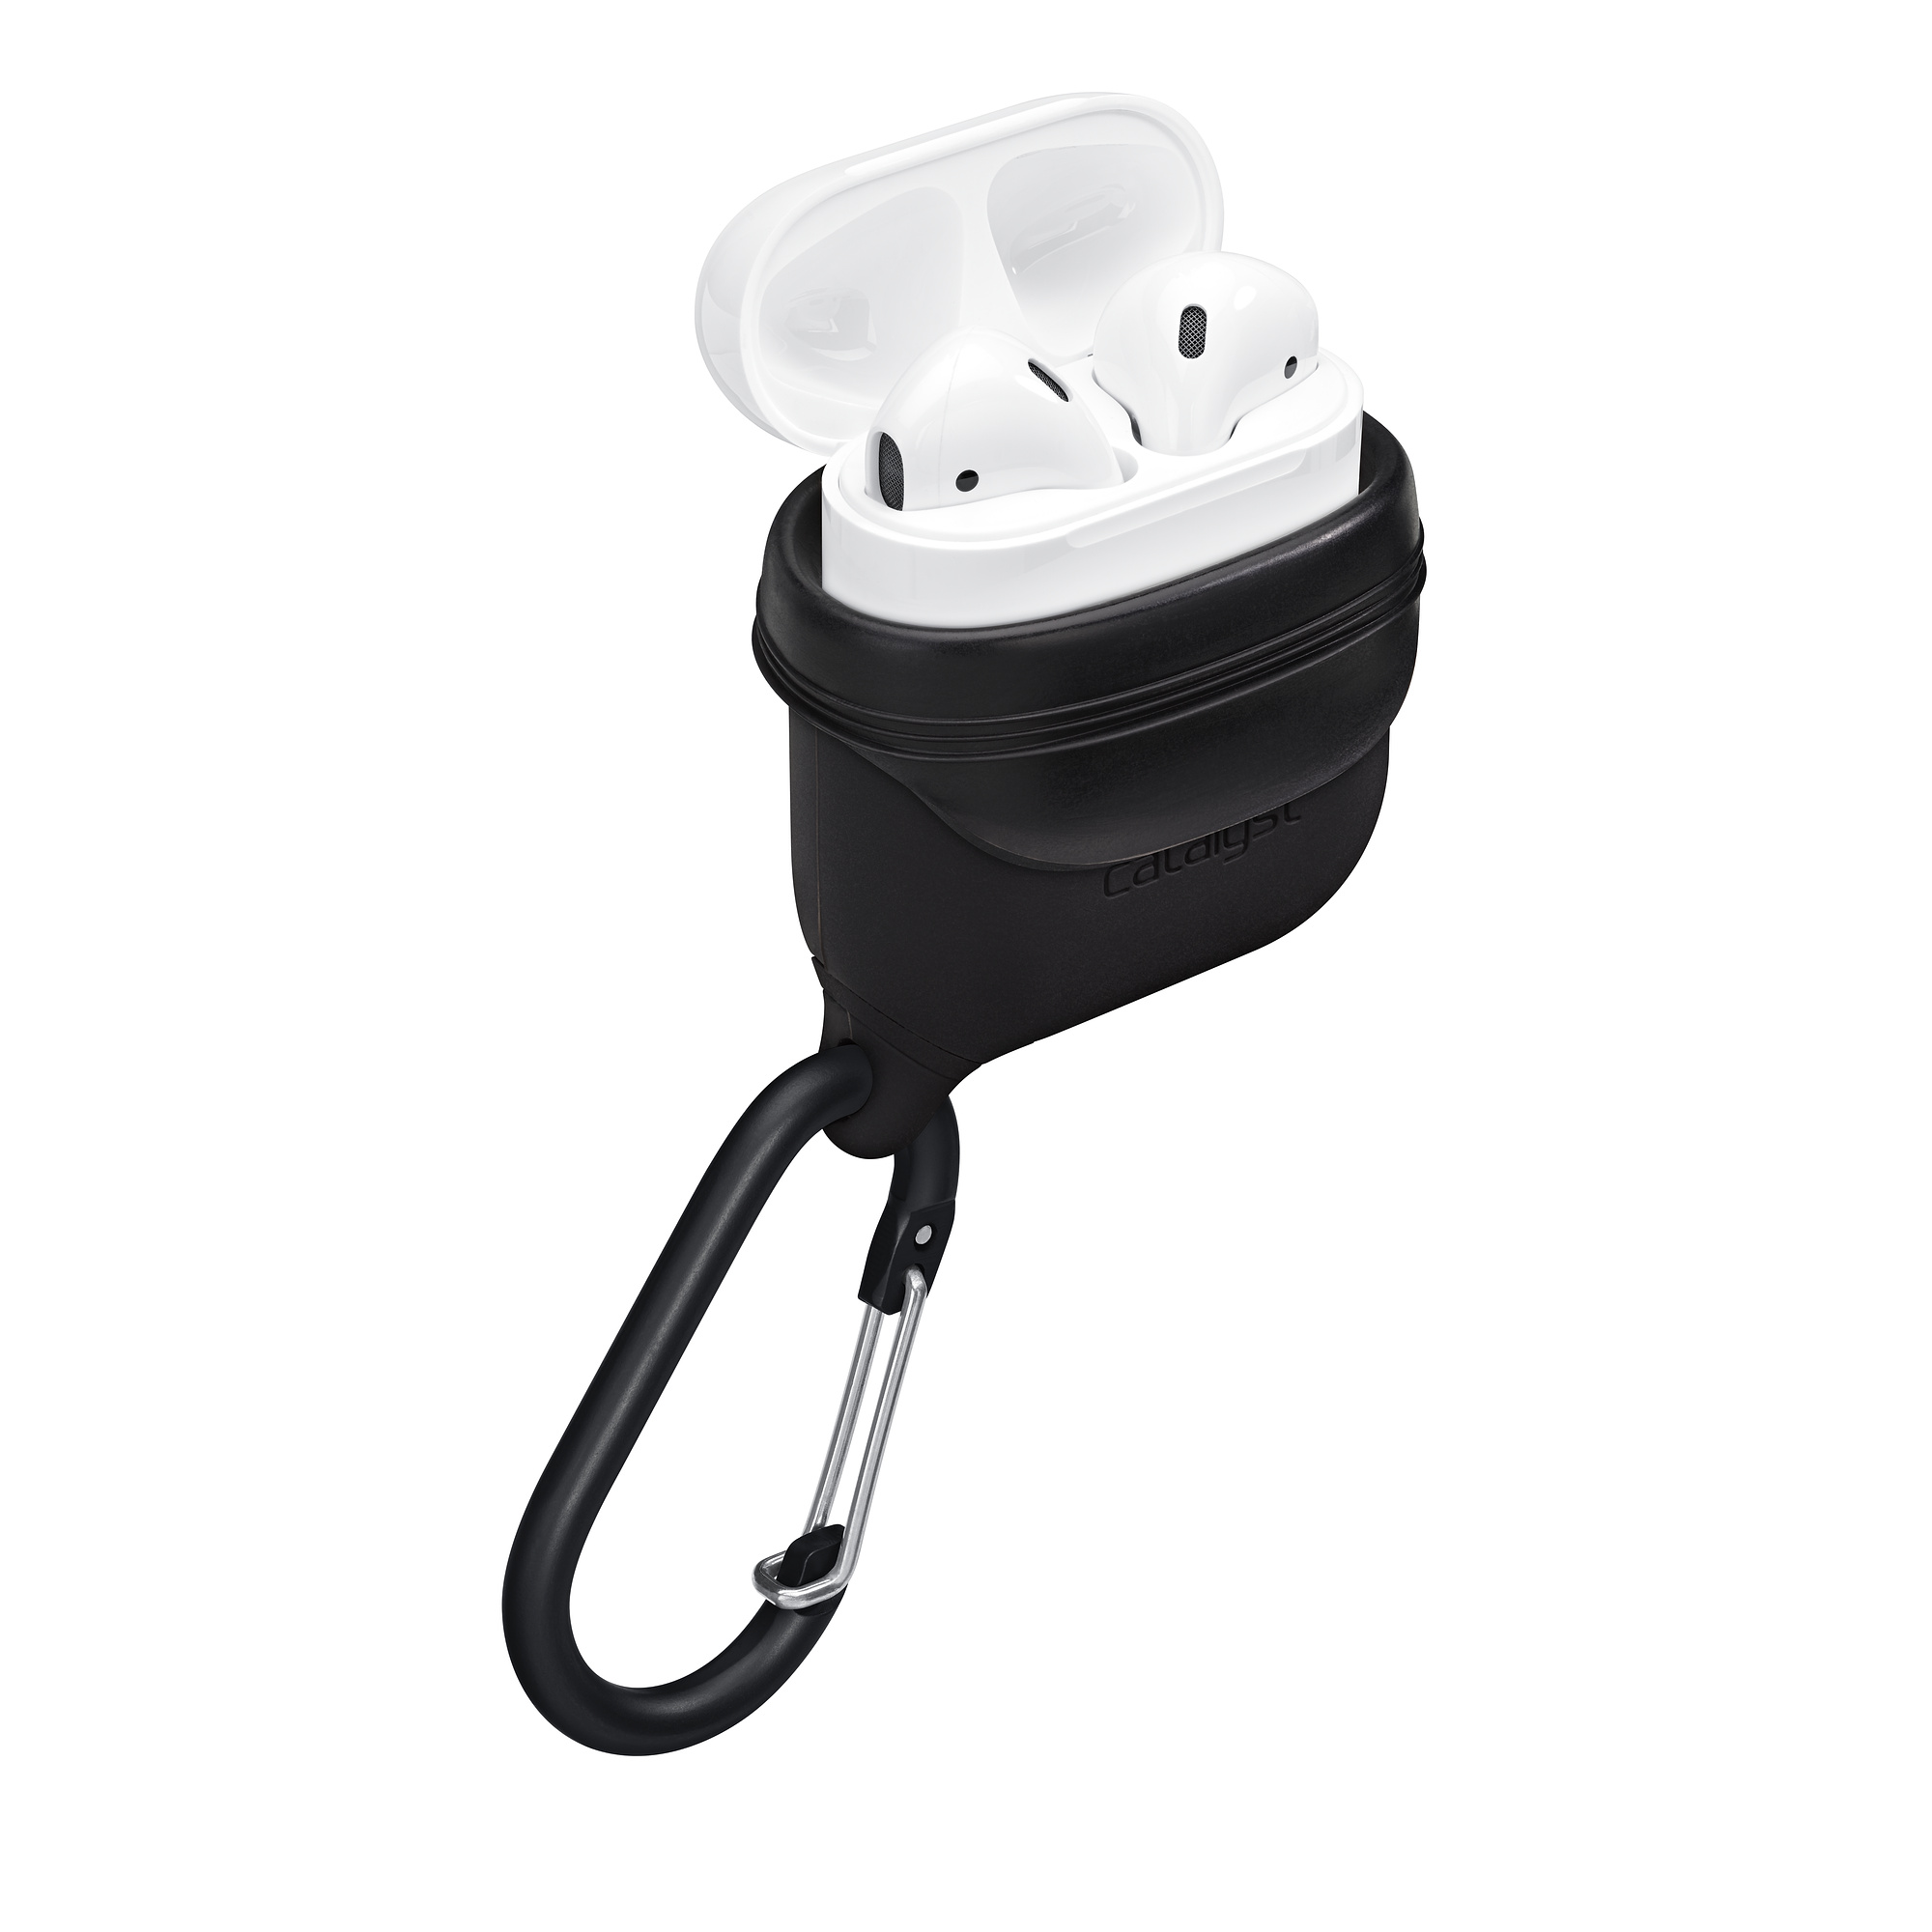 Catalyst Waterproof Case for AirPods - Special Edition - Black